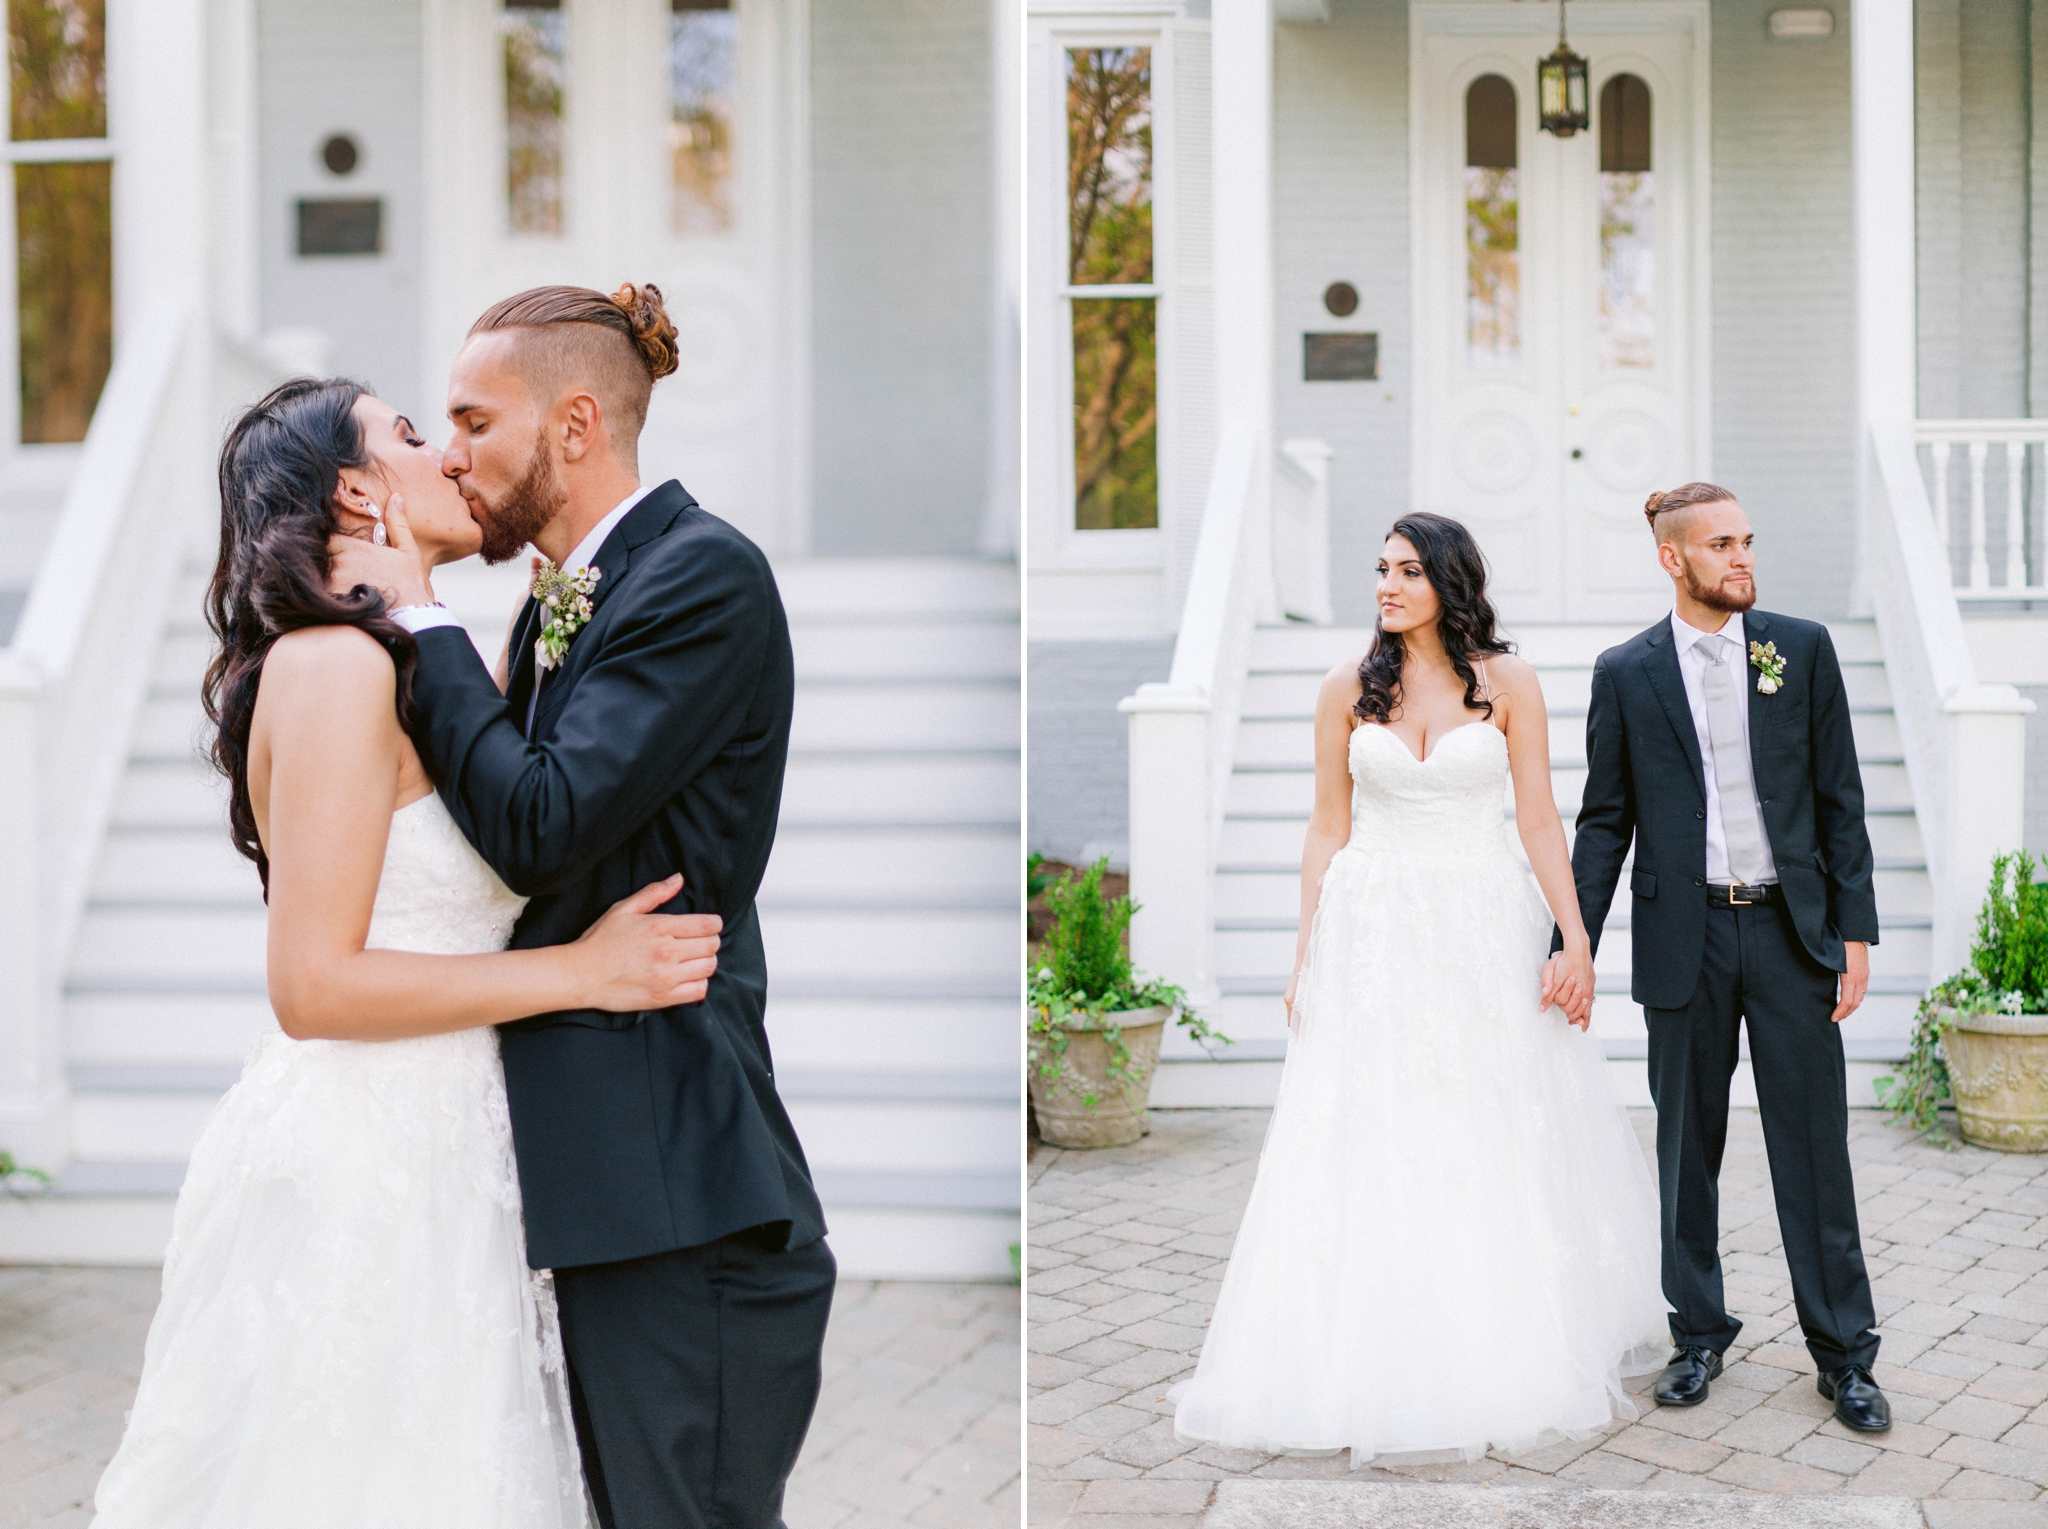  Couples portraits - Wedding Portraits on the front porch of an all white luxury estate - Bride is wearing a Aline Ballgown by Cherish by Southern Bride with a long cathedral veil - Groom is wearing a black suit by Generation Tux and has a man bun - 